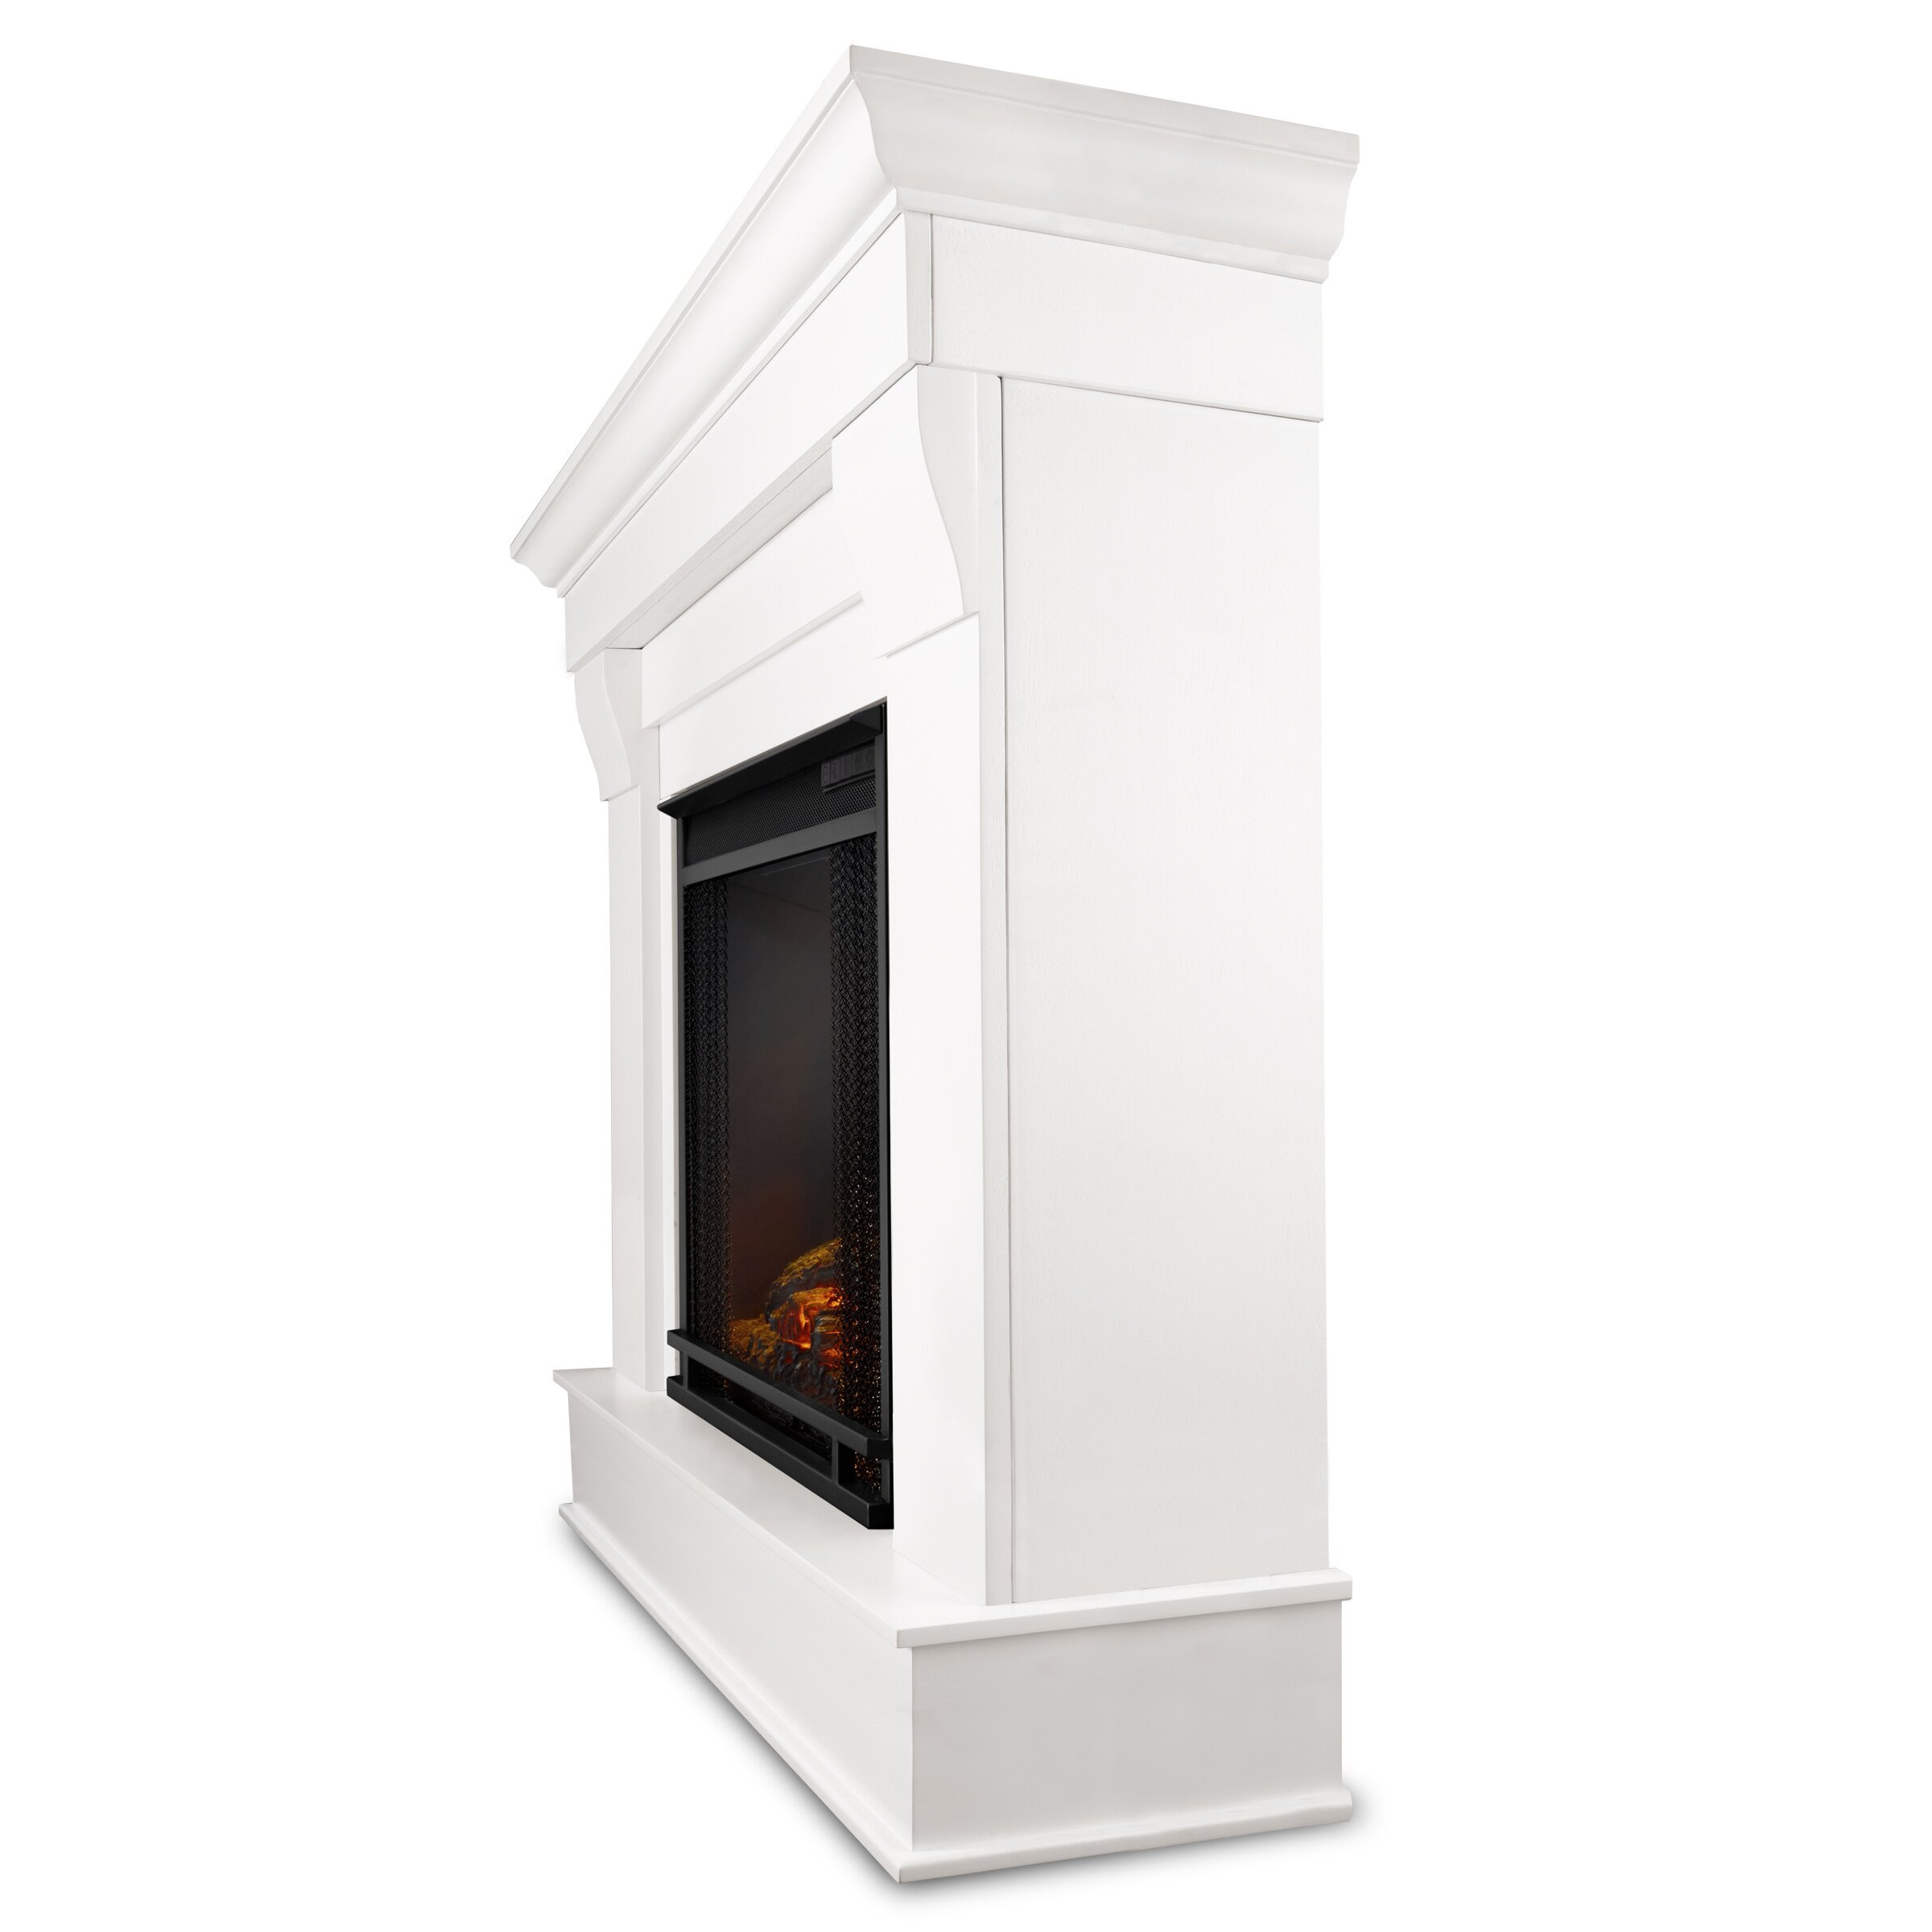 Real Flame Electric Fireplace Reviews
 Real Flame Chateau Electric Fireplace & Reviews